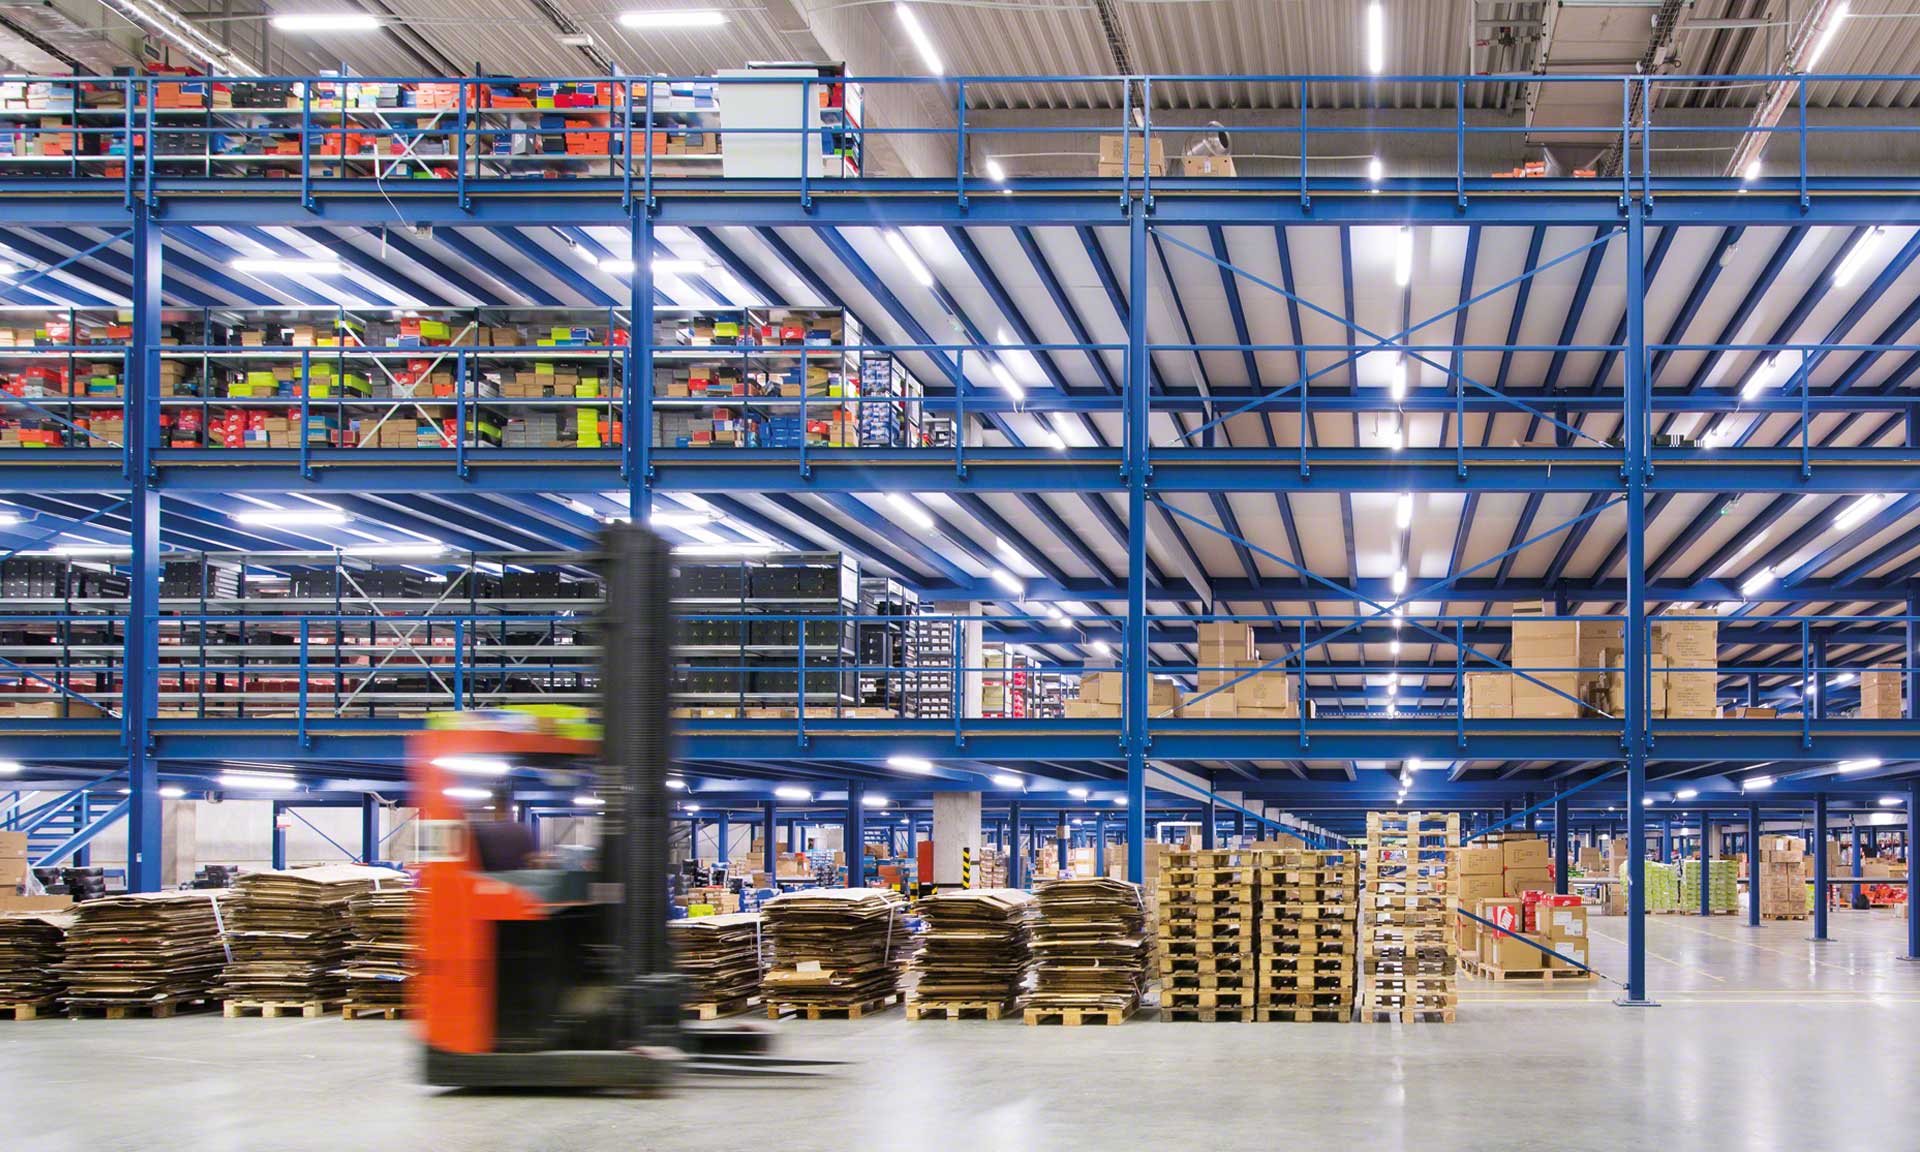 Sportisimo: optimized warehouse with pallet racks and picking shelves